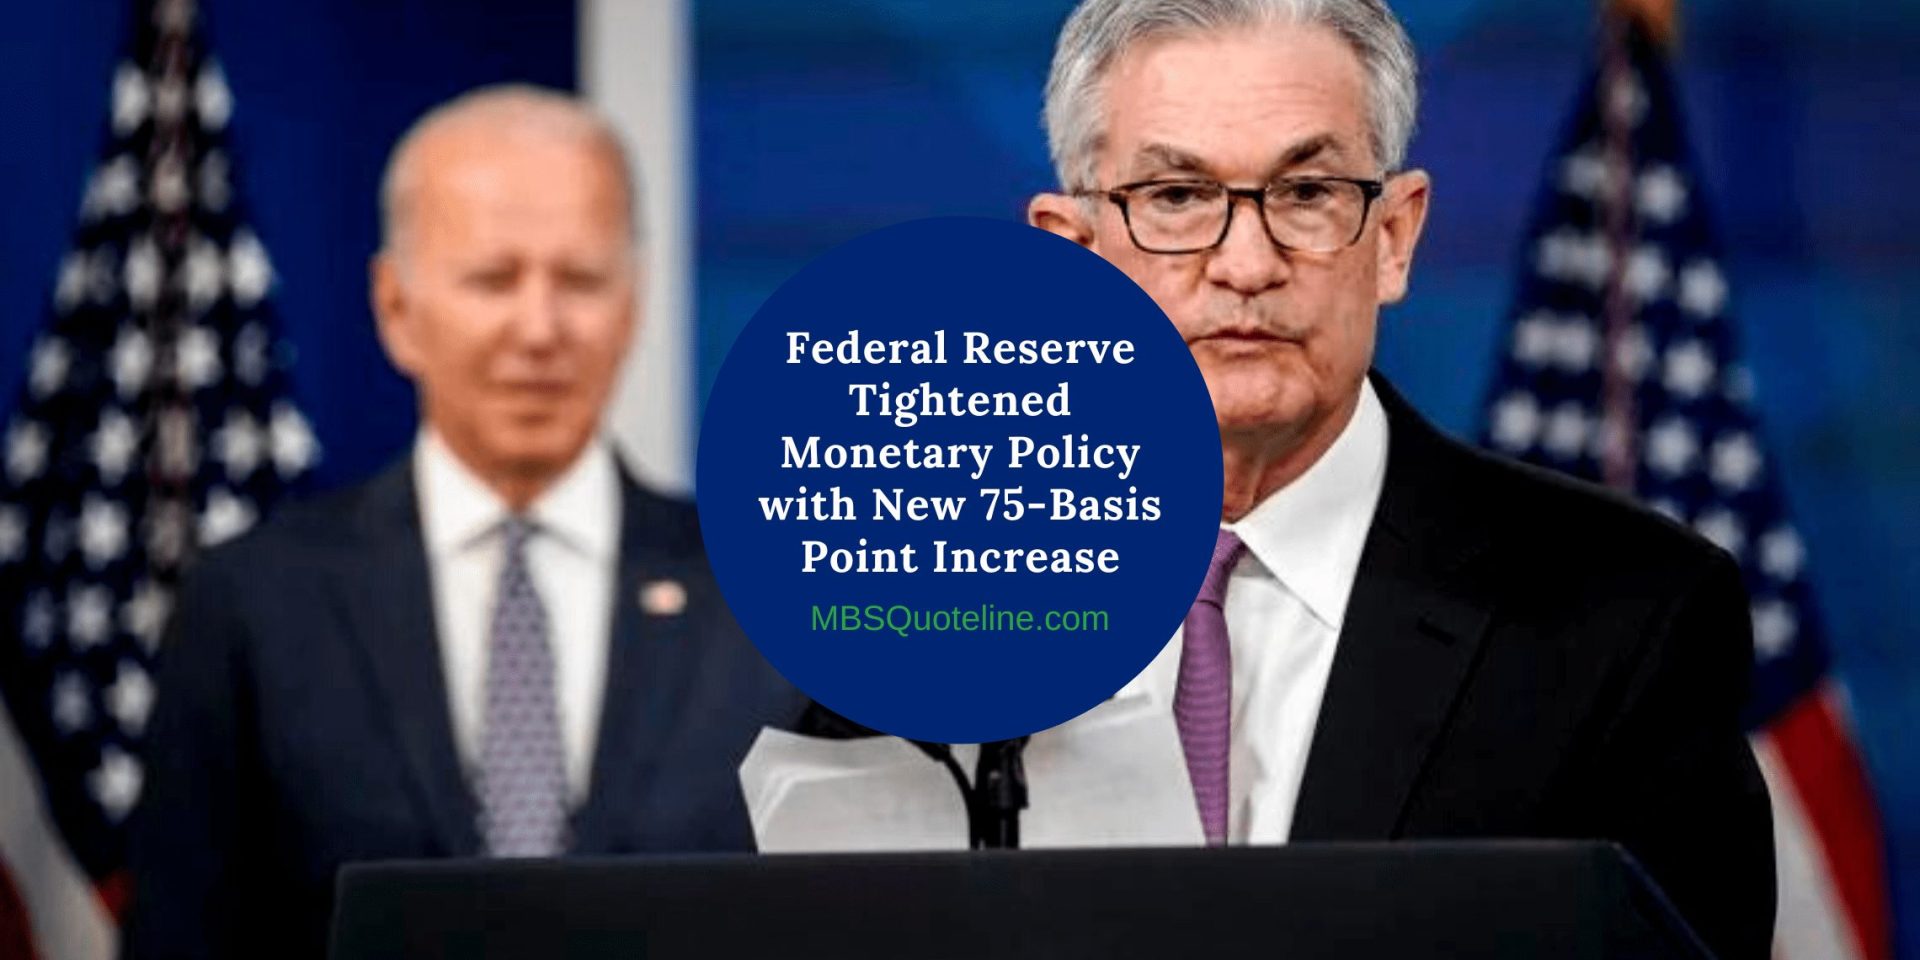 federal reserve tightened monetary policy new 75-basis point increase mortgagetime mbsquoteline featured